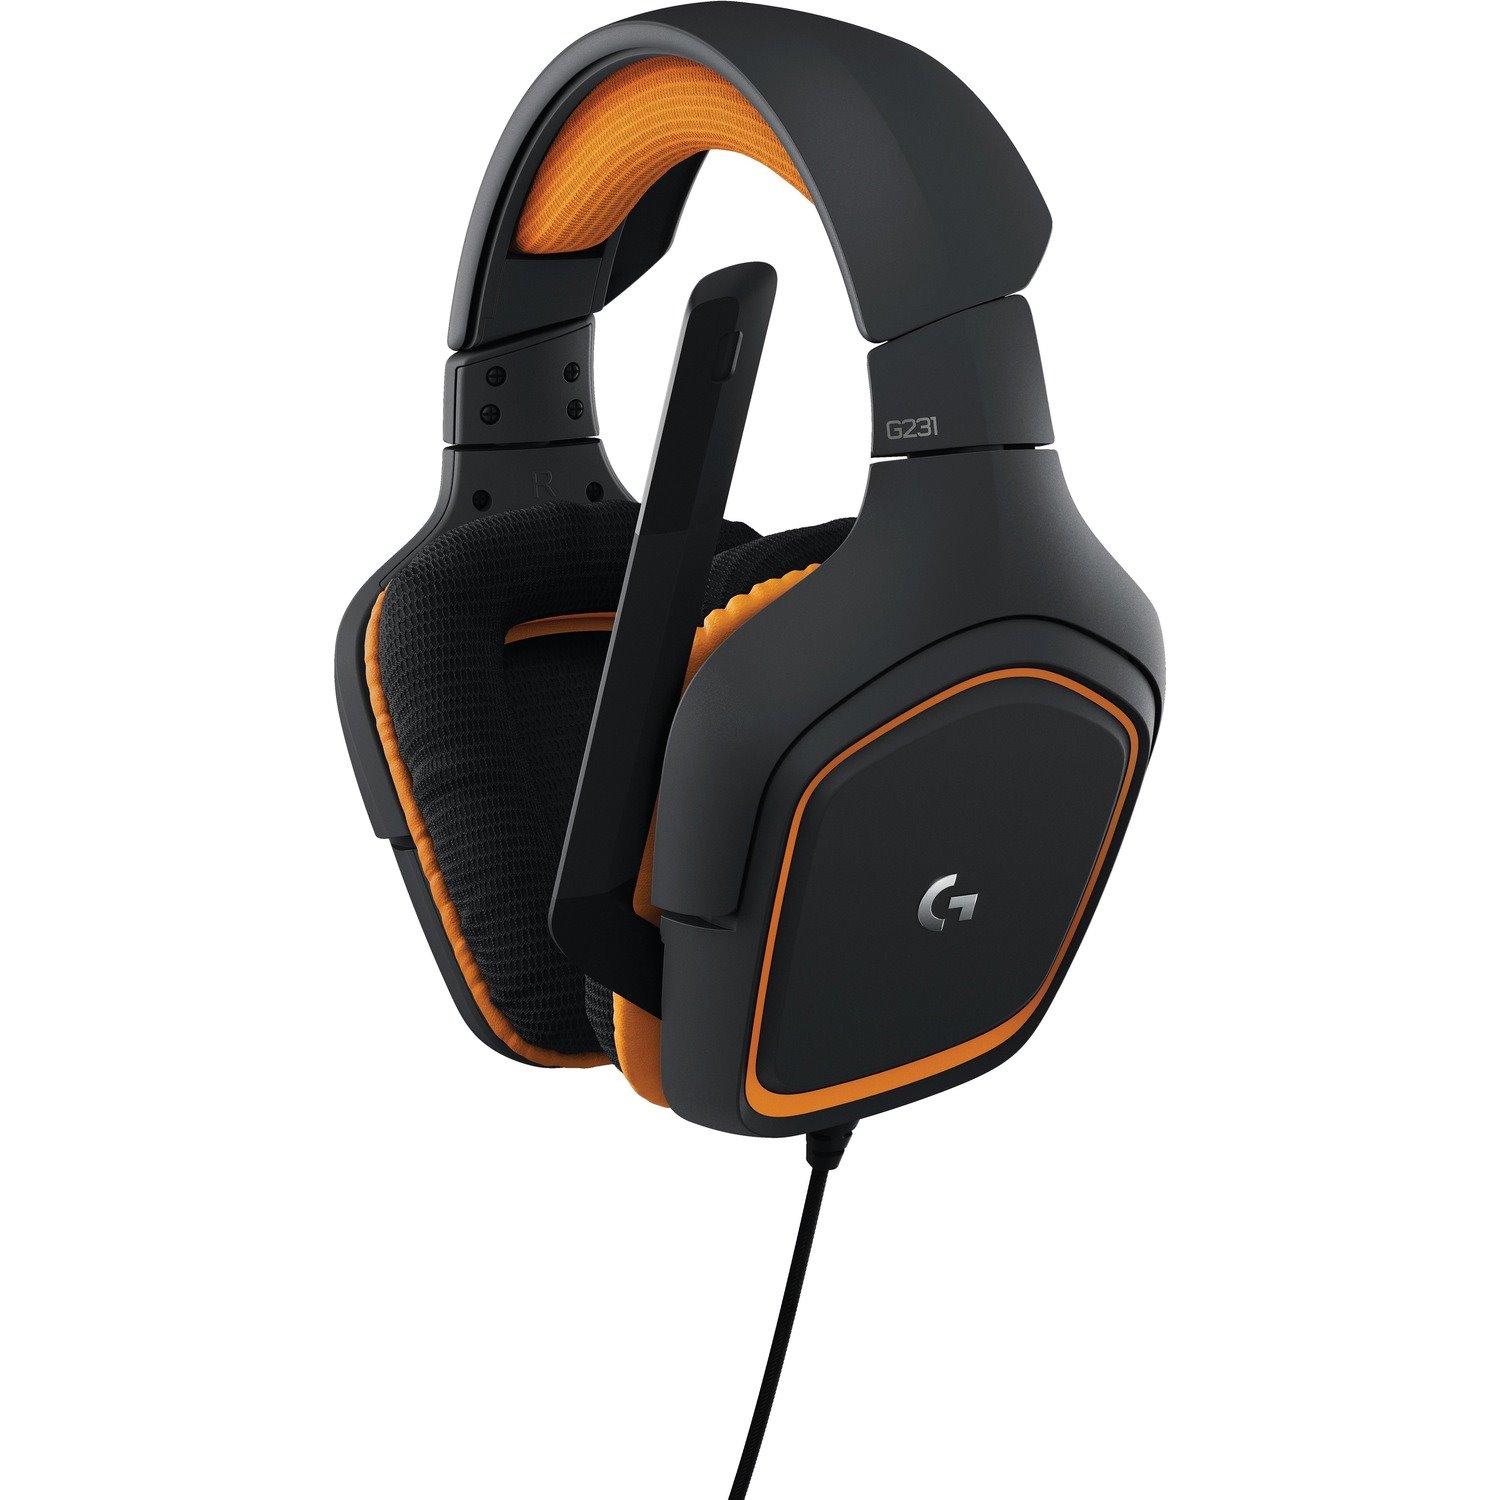 Logitech Prodigy G231 Wired Over-the-head Stereo Gaming Headset